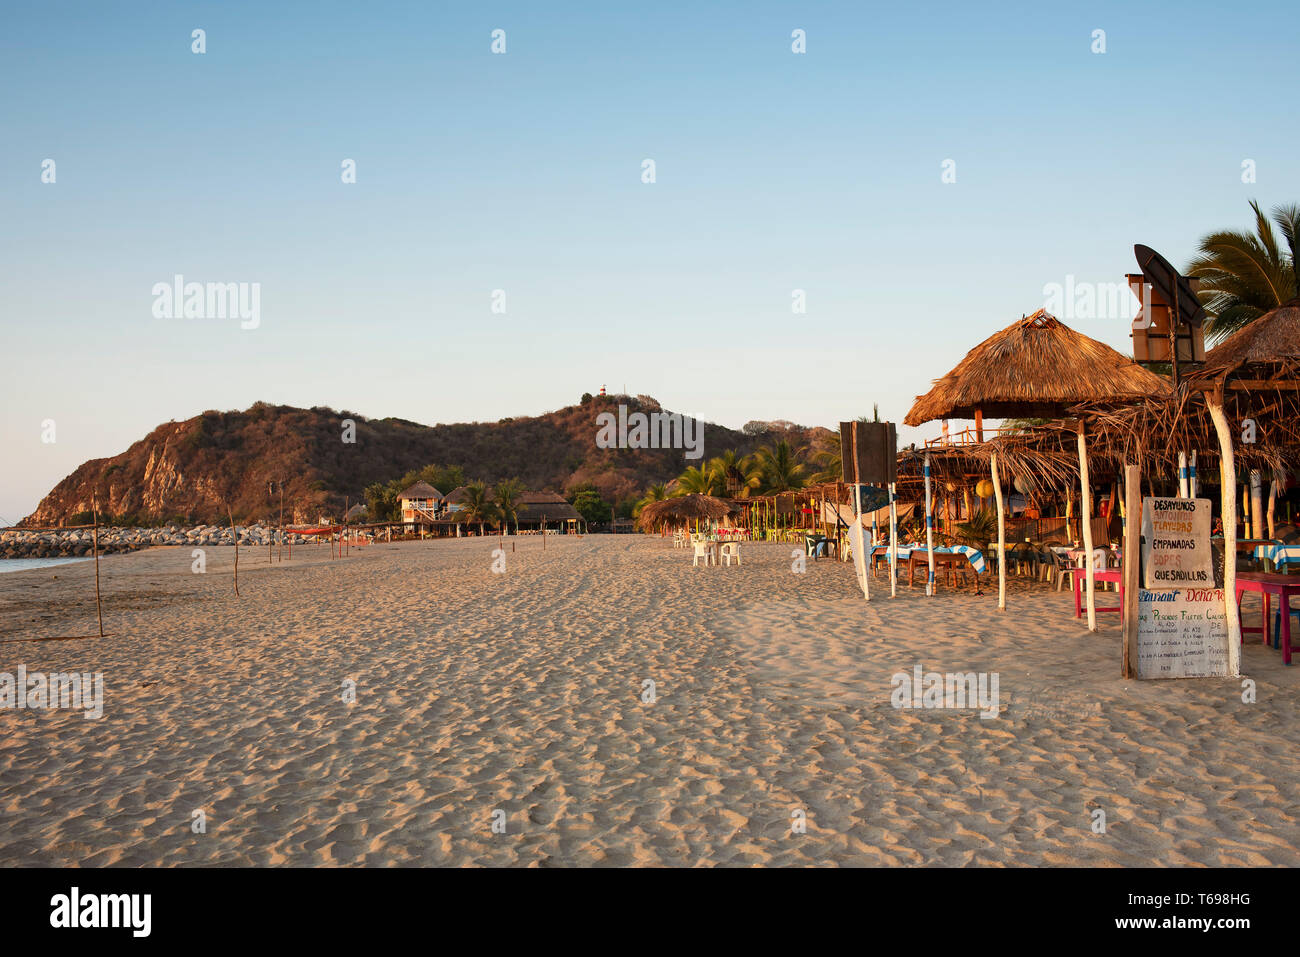 Simple beach with eateries with plastic chairs. Chacahua National Park, Oaxaca State, Mexico. Apr 2019 Stock Photo